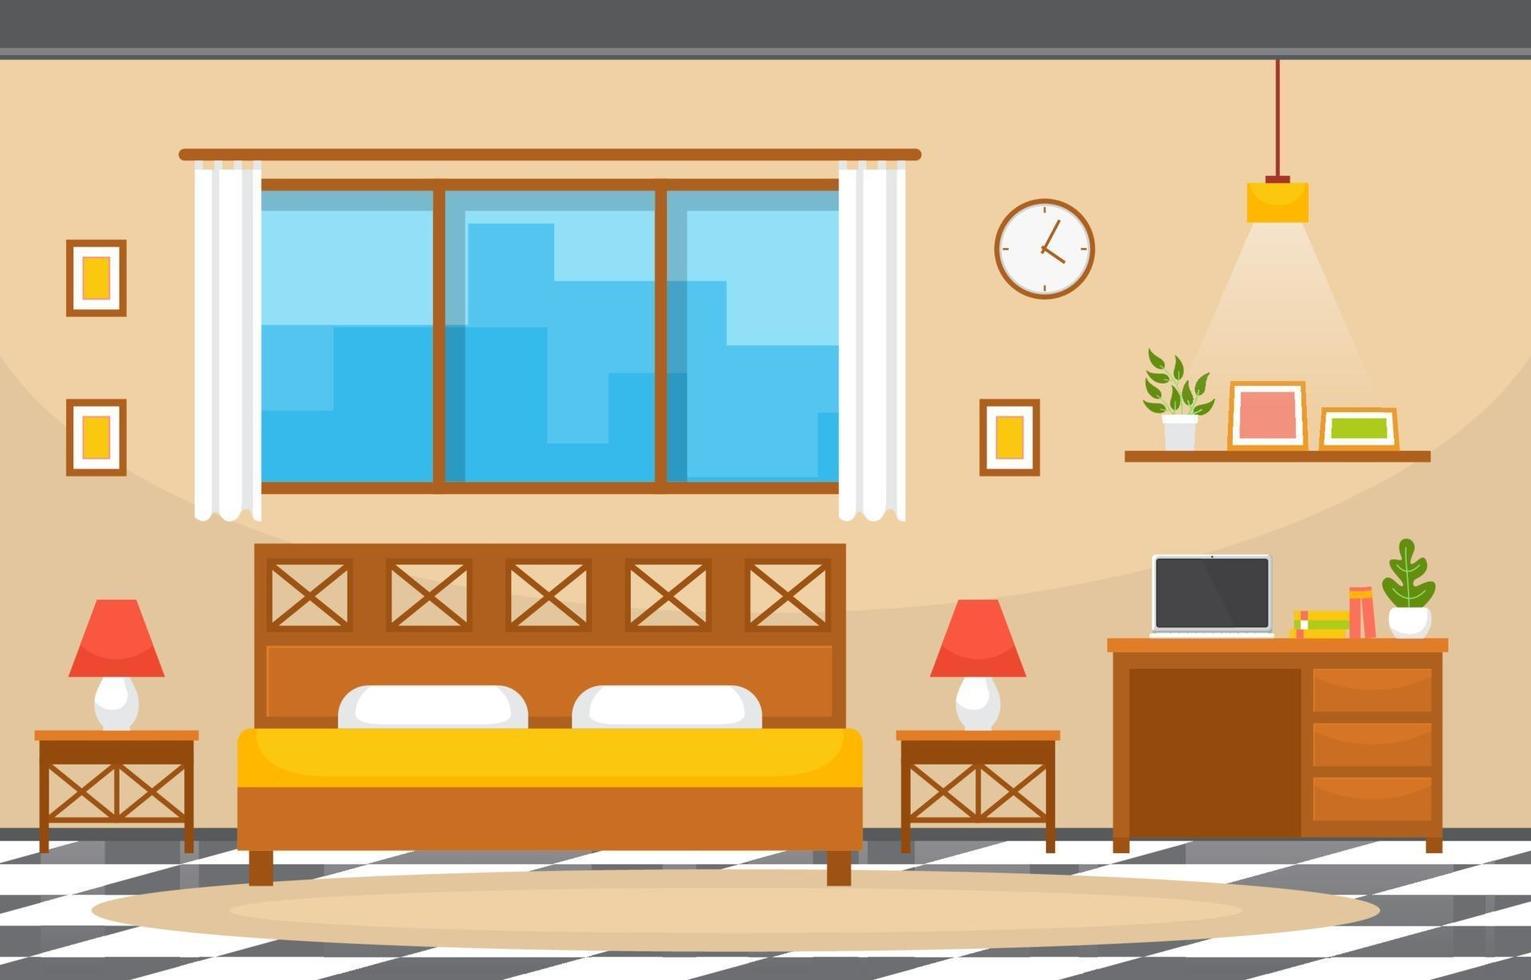 Cozy Hotel Bedroom Interior with Double Bed and Lamps vector